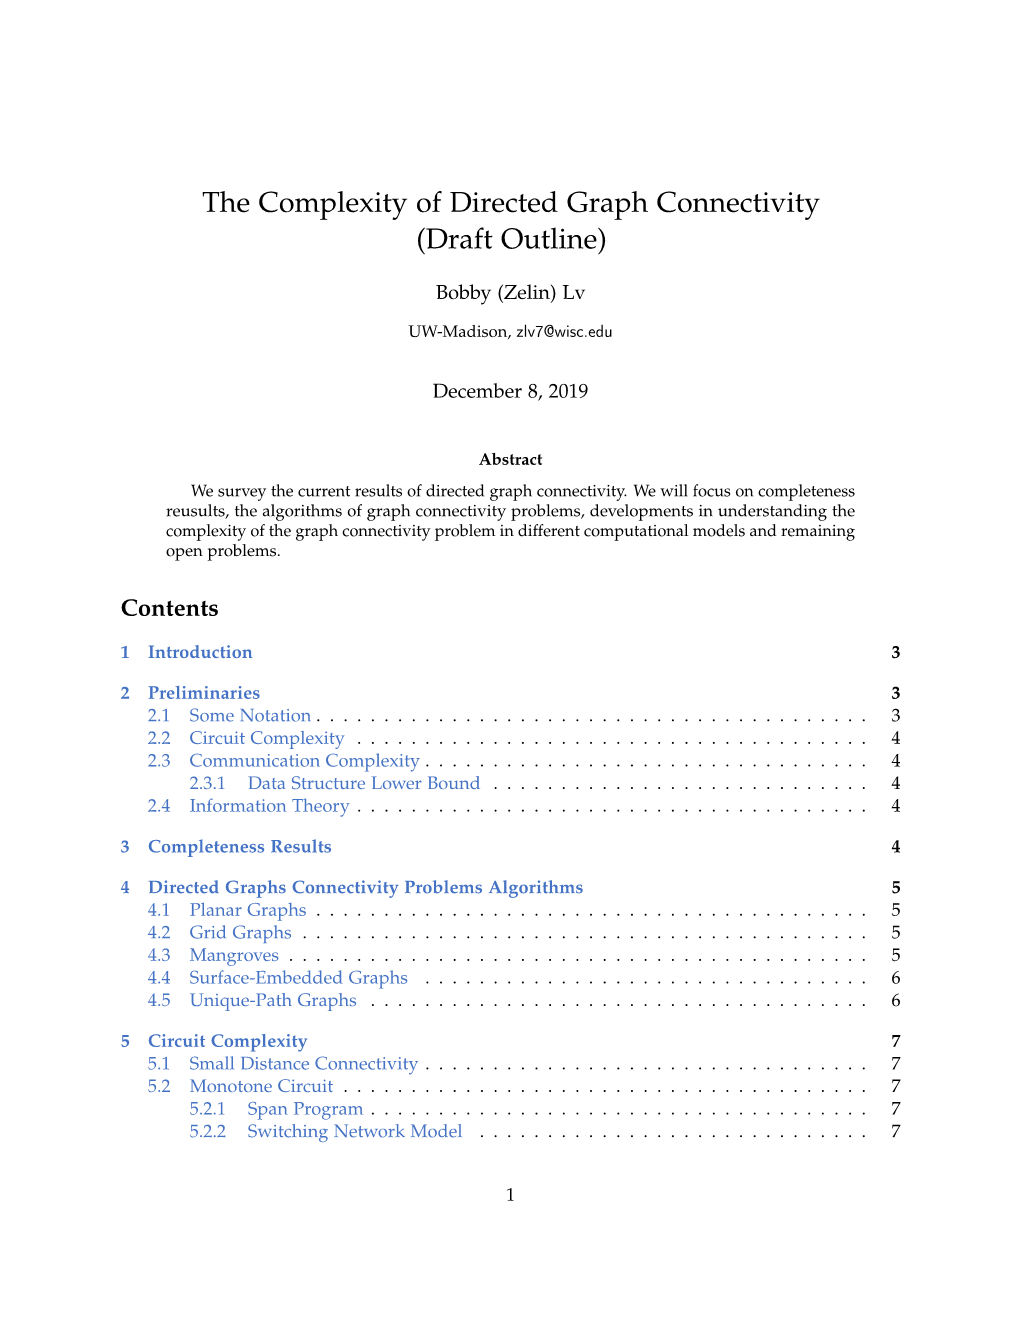 The Complexity of Directed Graph Connectivity (Draft Outline)